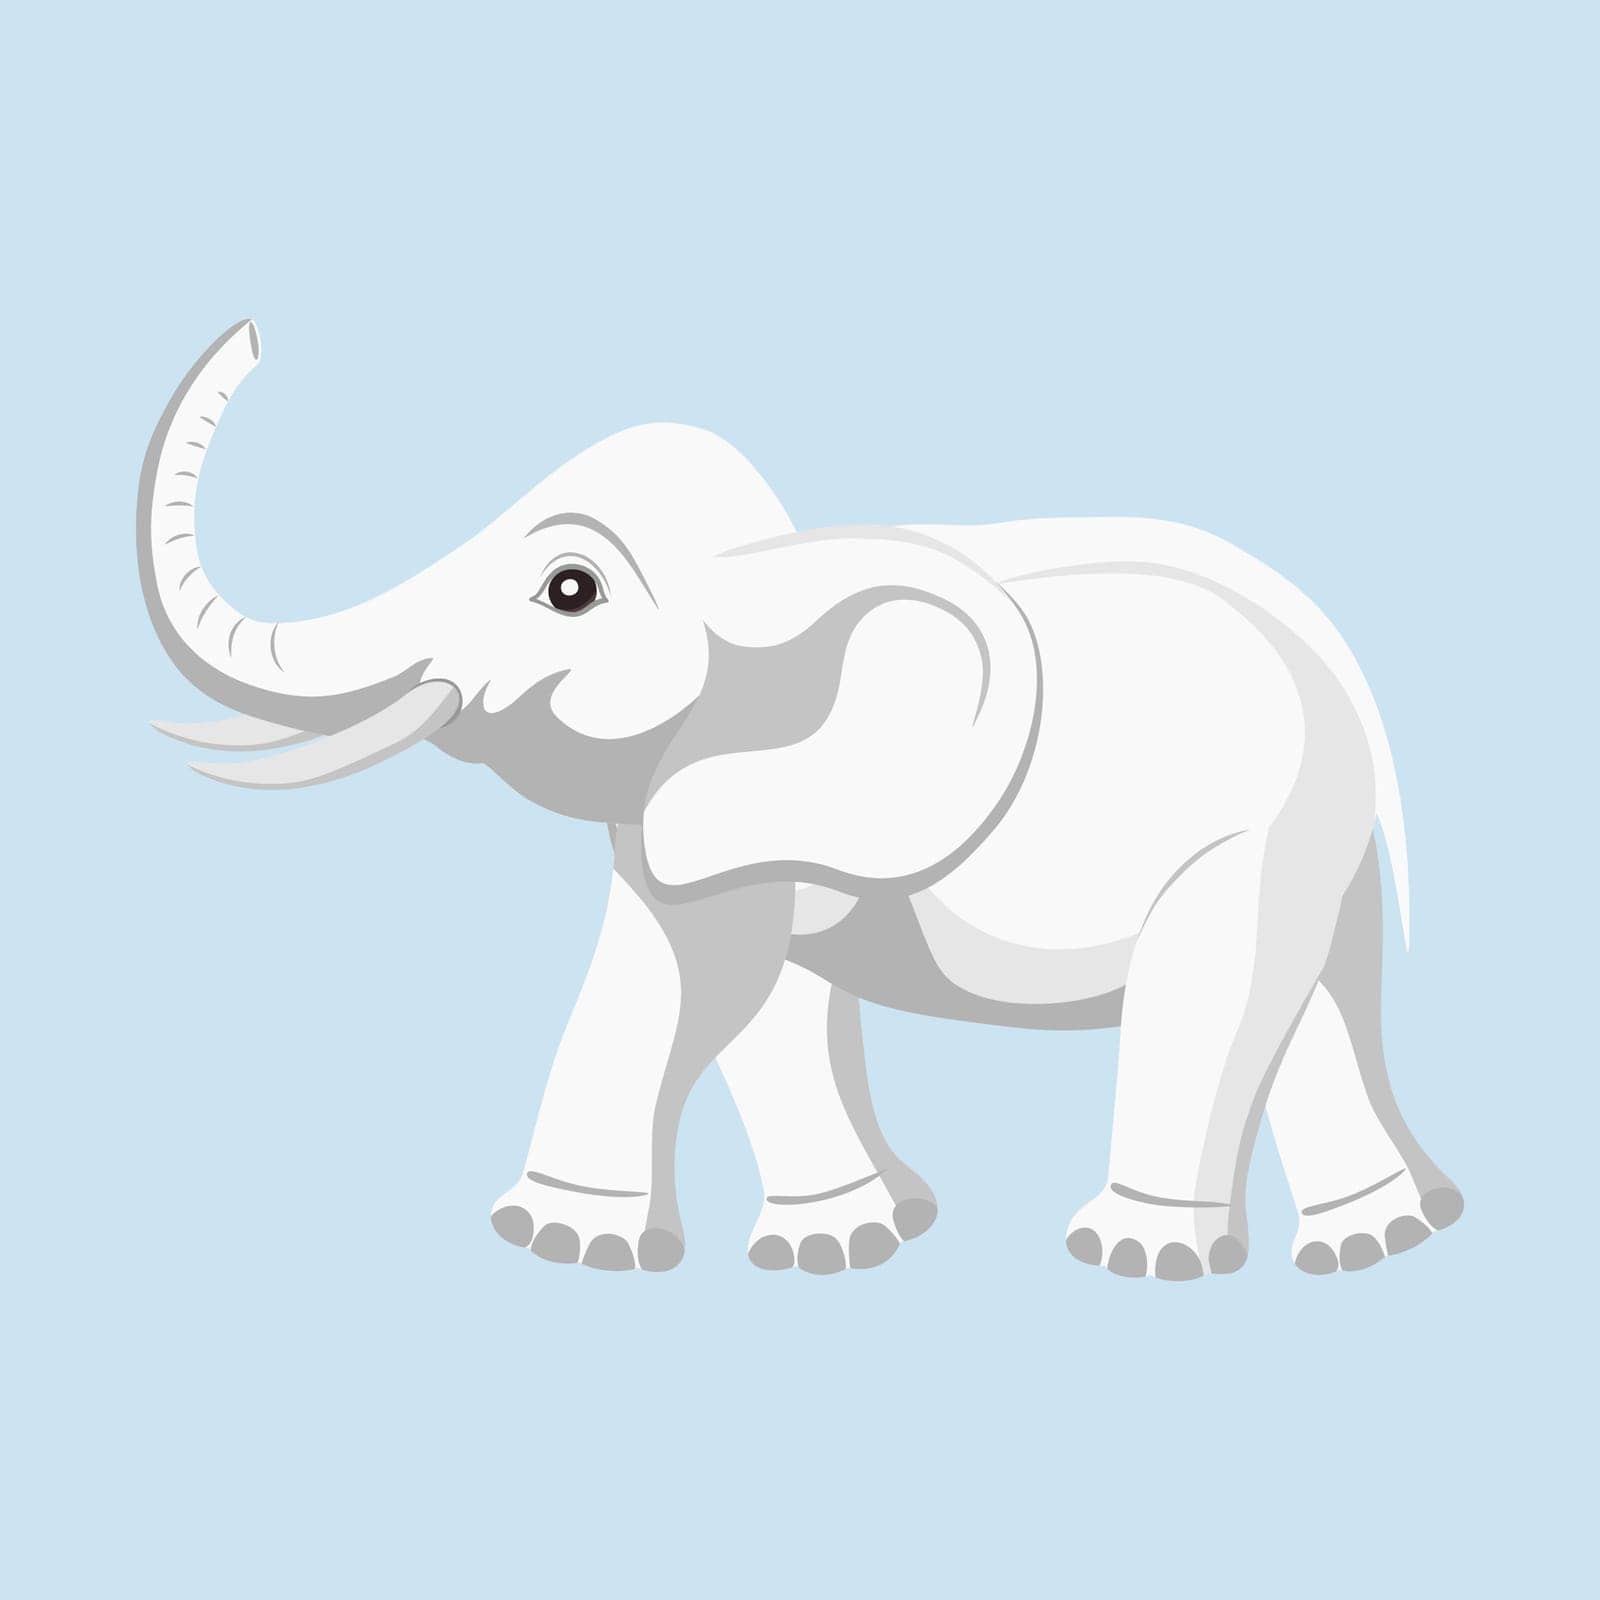 Large white African elephant with its trunk raised up. Large land mammal. The largest land animal. A herbivorous mammal with a trunk, tusks and large ears. Vector illustration.